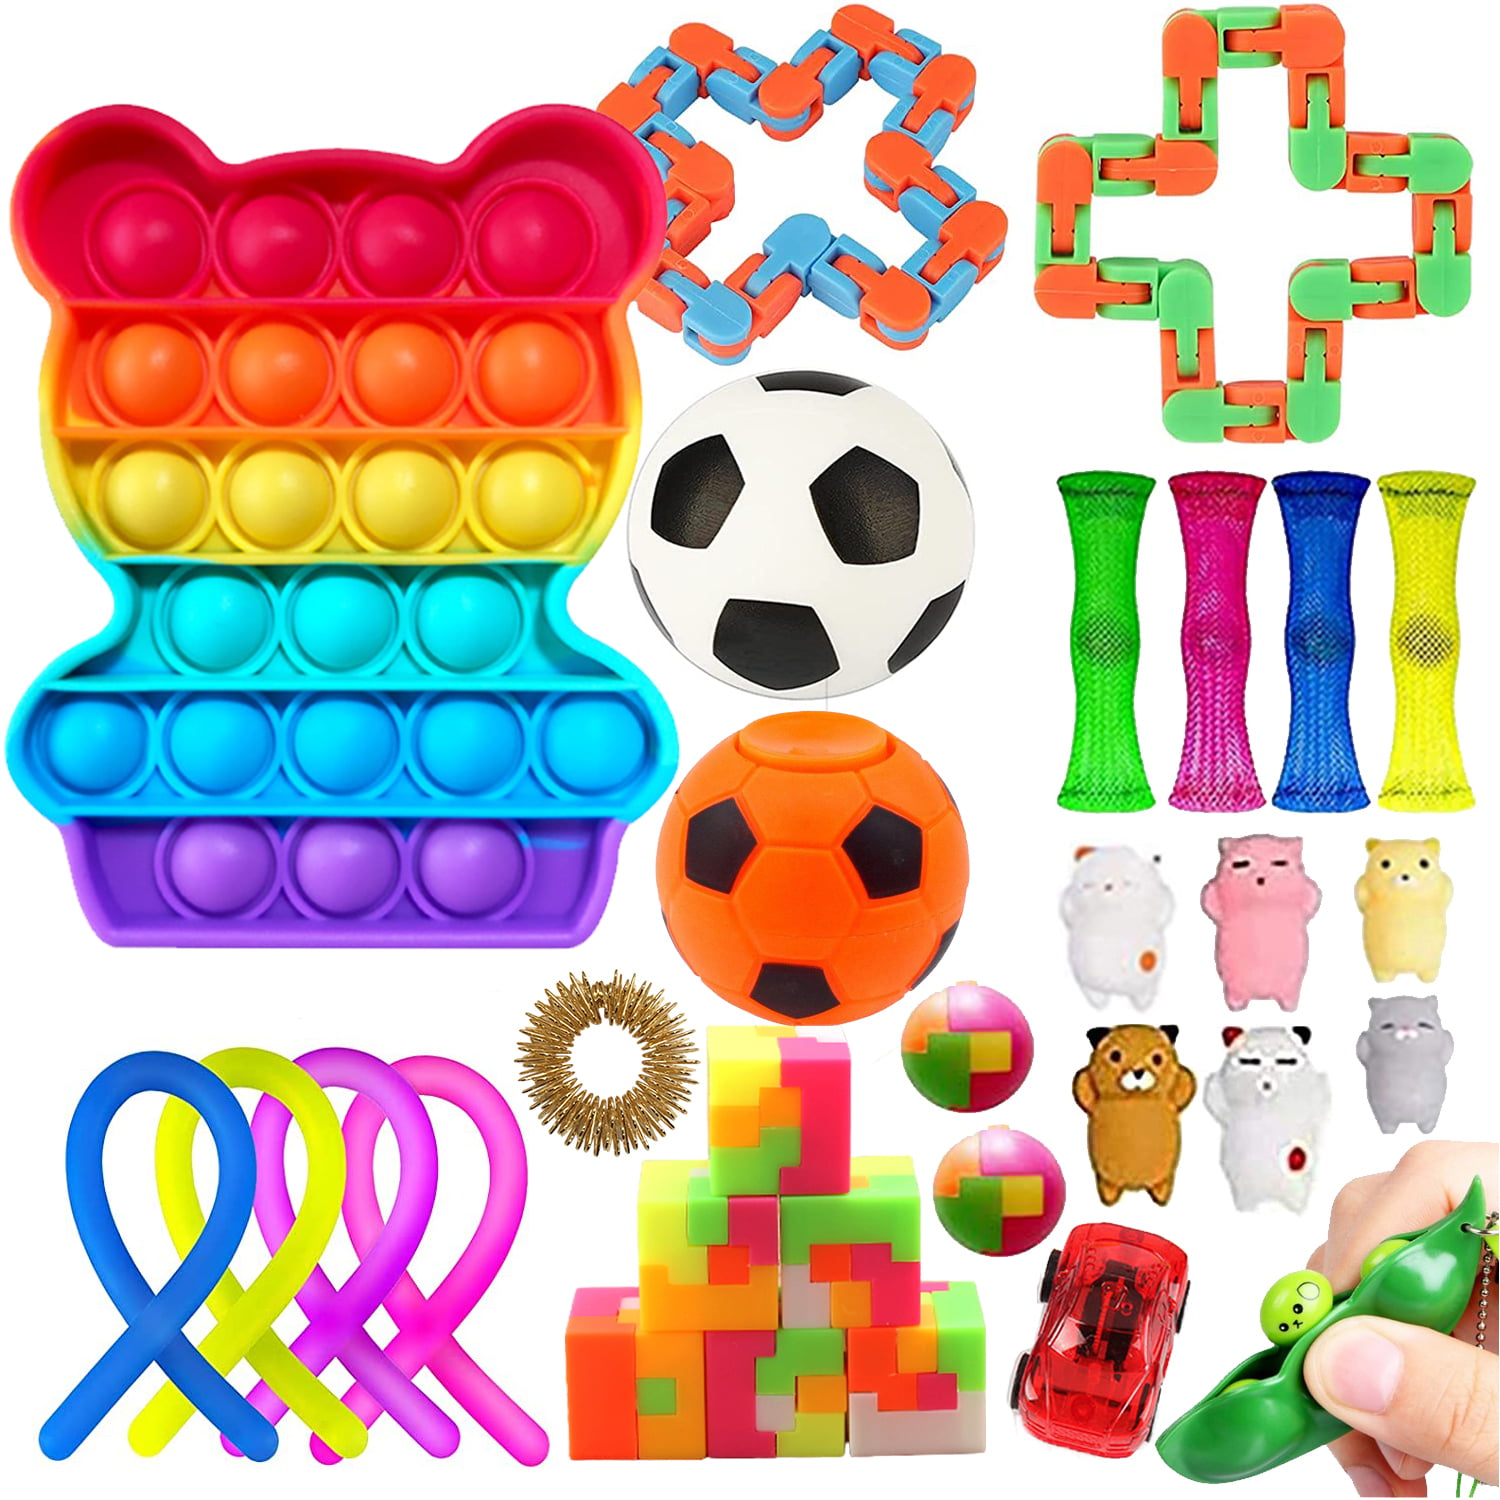 Details about   Adult Kids Gifts Push Bubble Sensory Fidget Toy Autism Stress Relief Family Game 